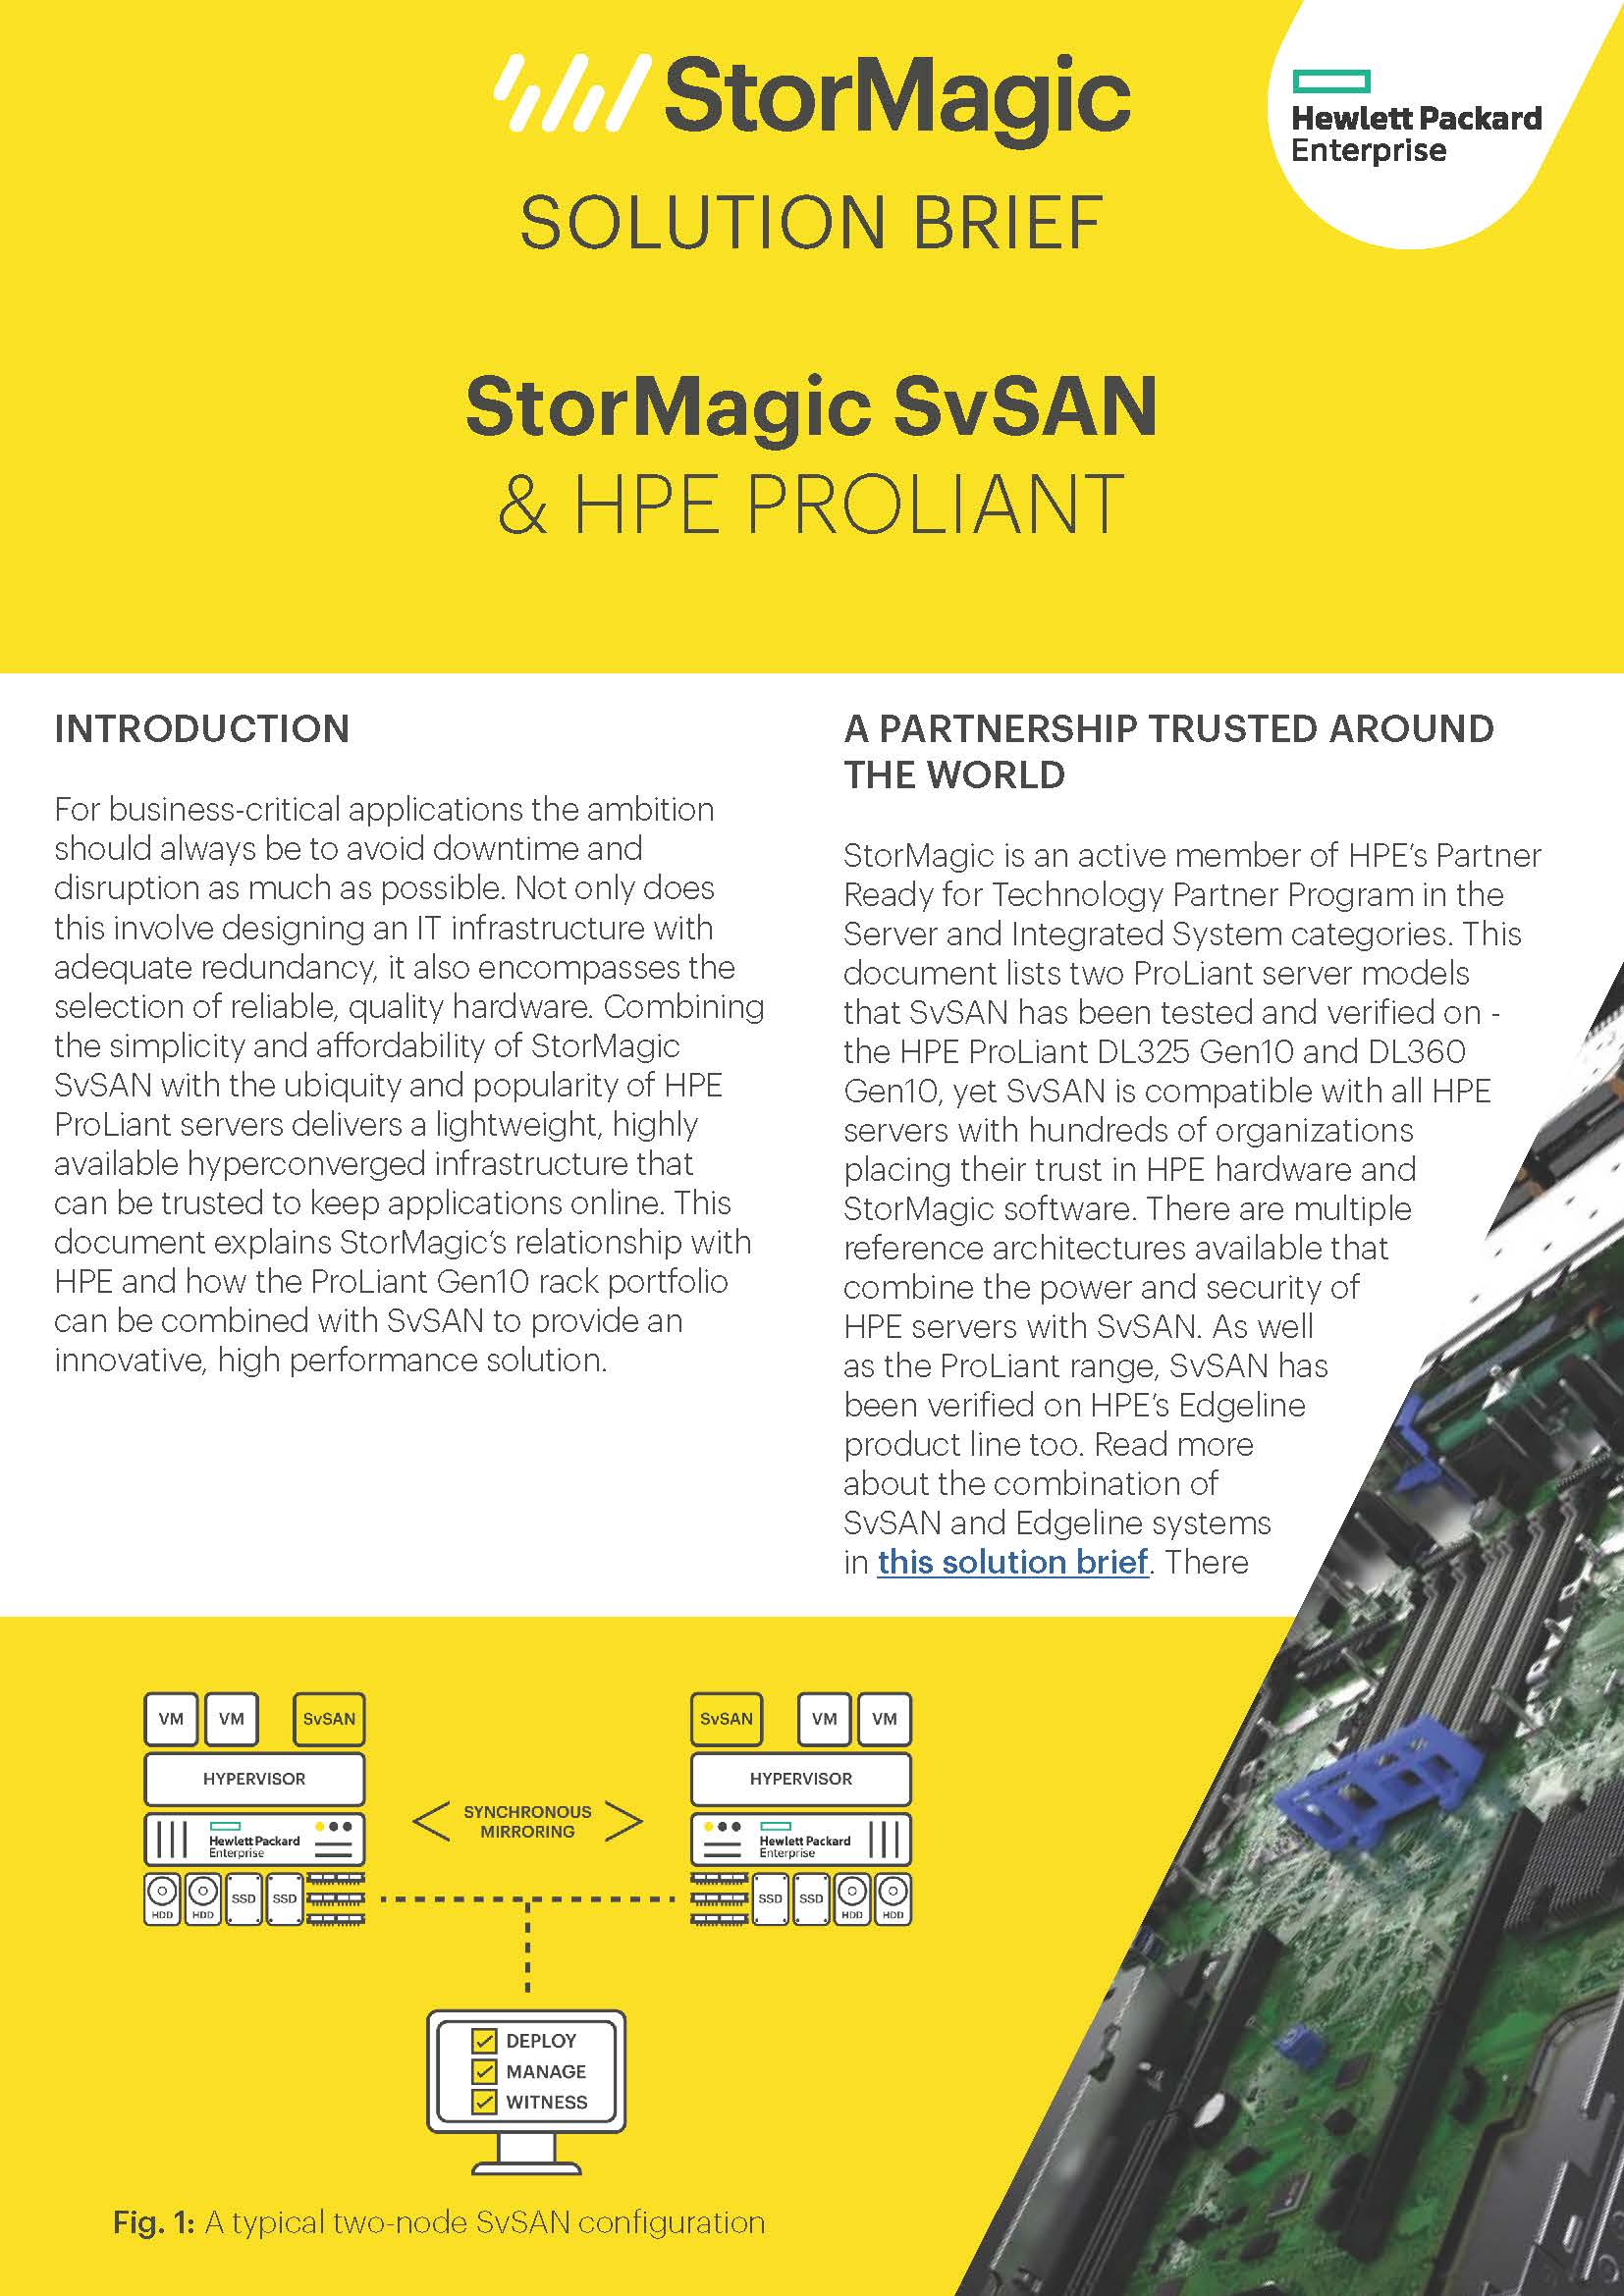 StorMagic SvSAN and HPE ProLiant solution brief